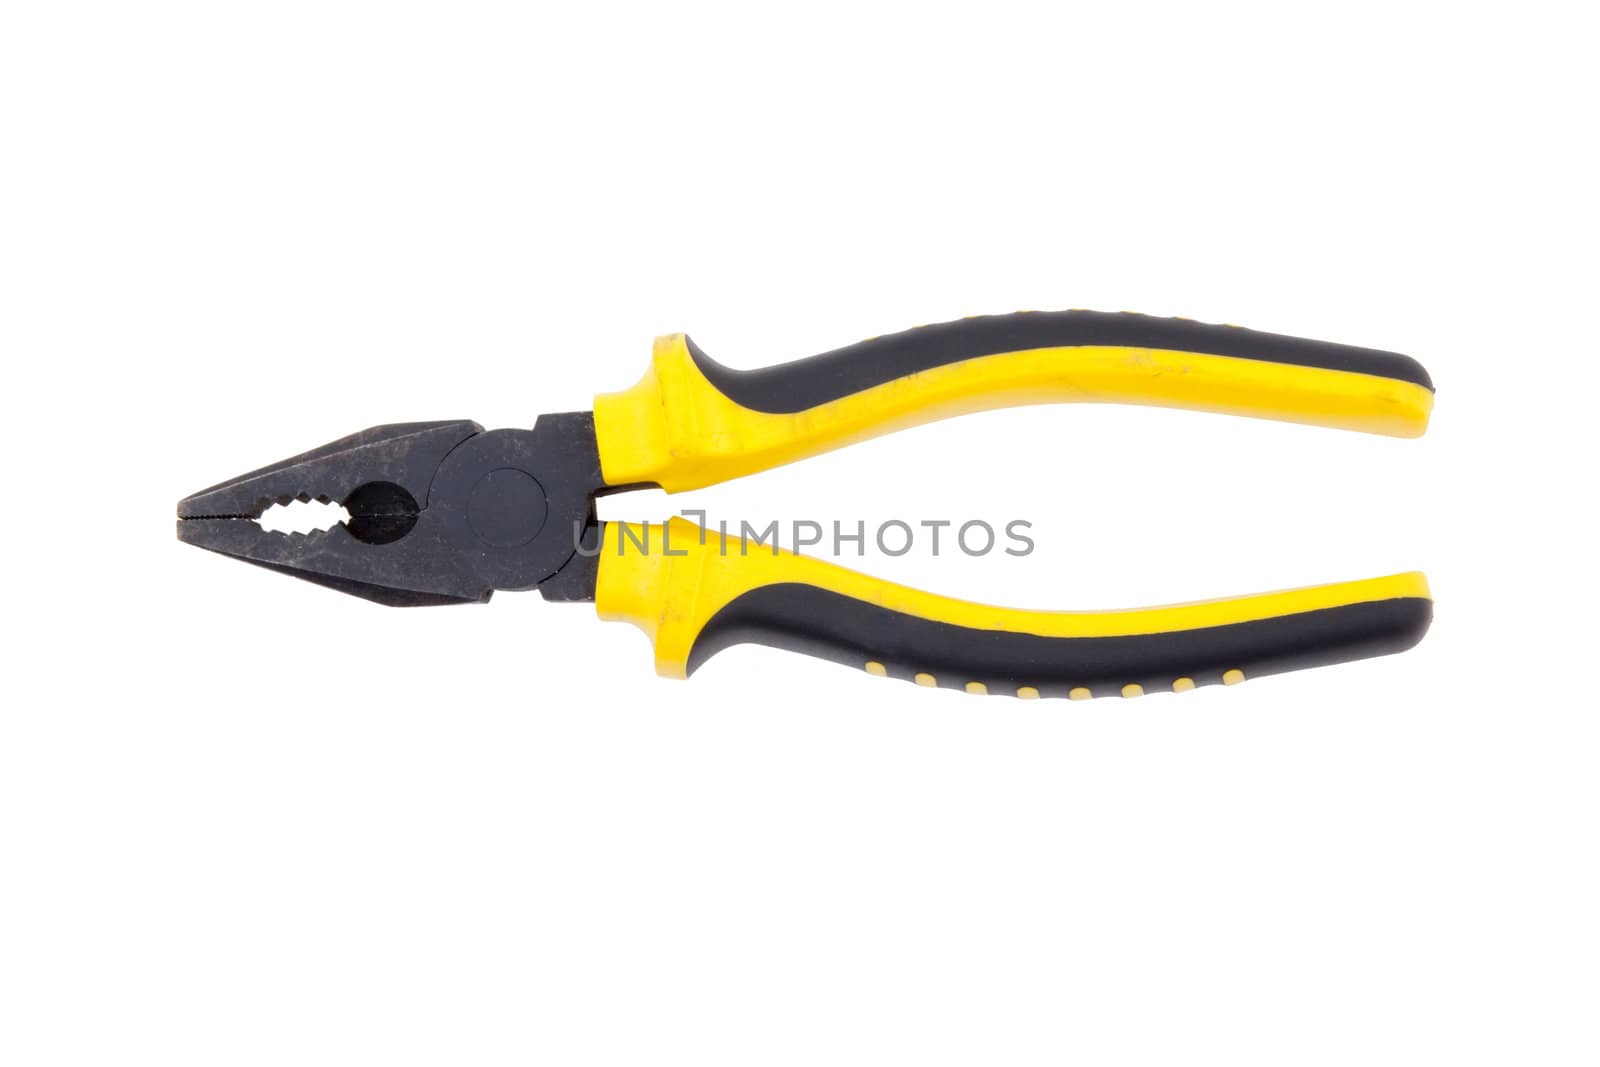 Pliers isolated on white background for you site